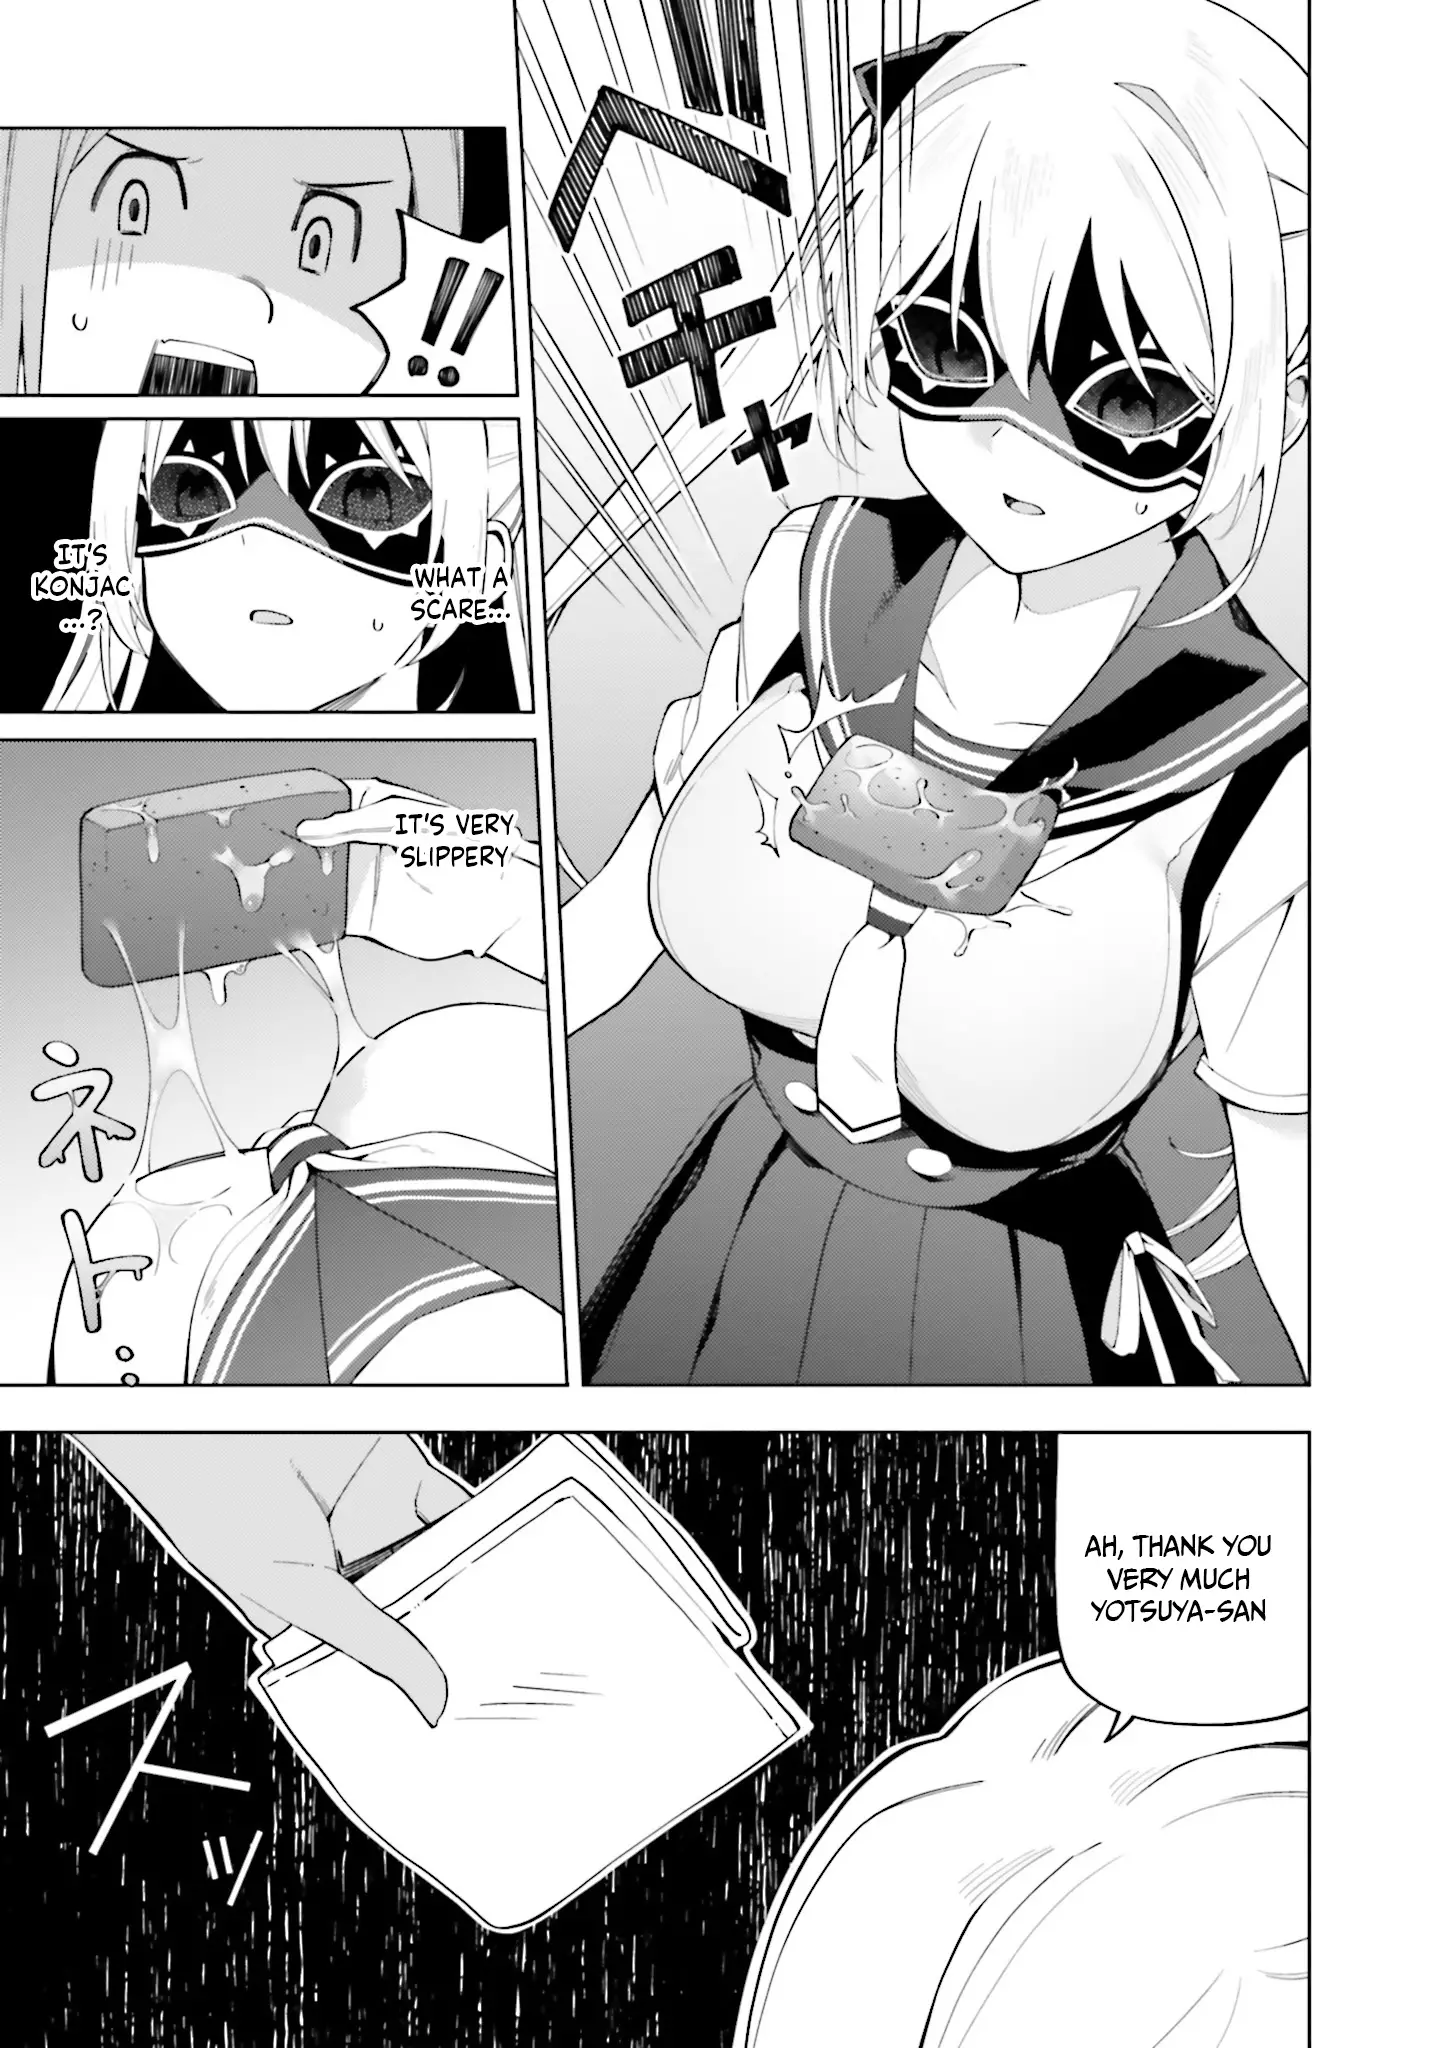 I Don't Understand Shirogane-San's Facial Expression At All - 12 page 12-e6cd72dd